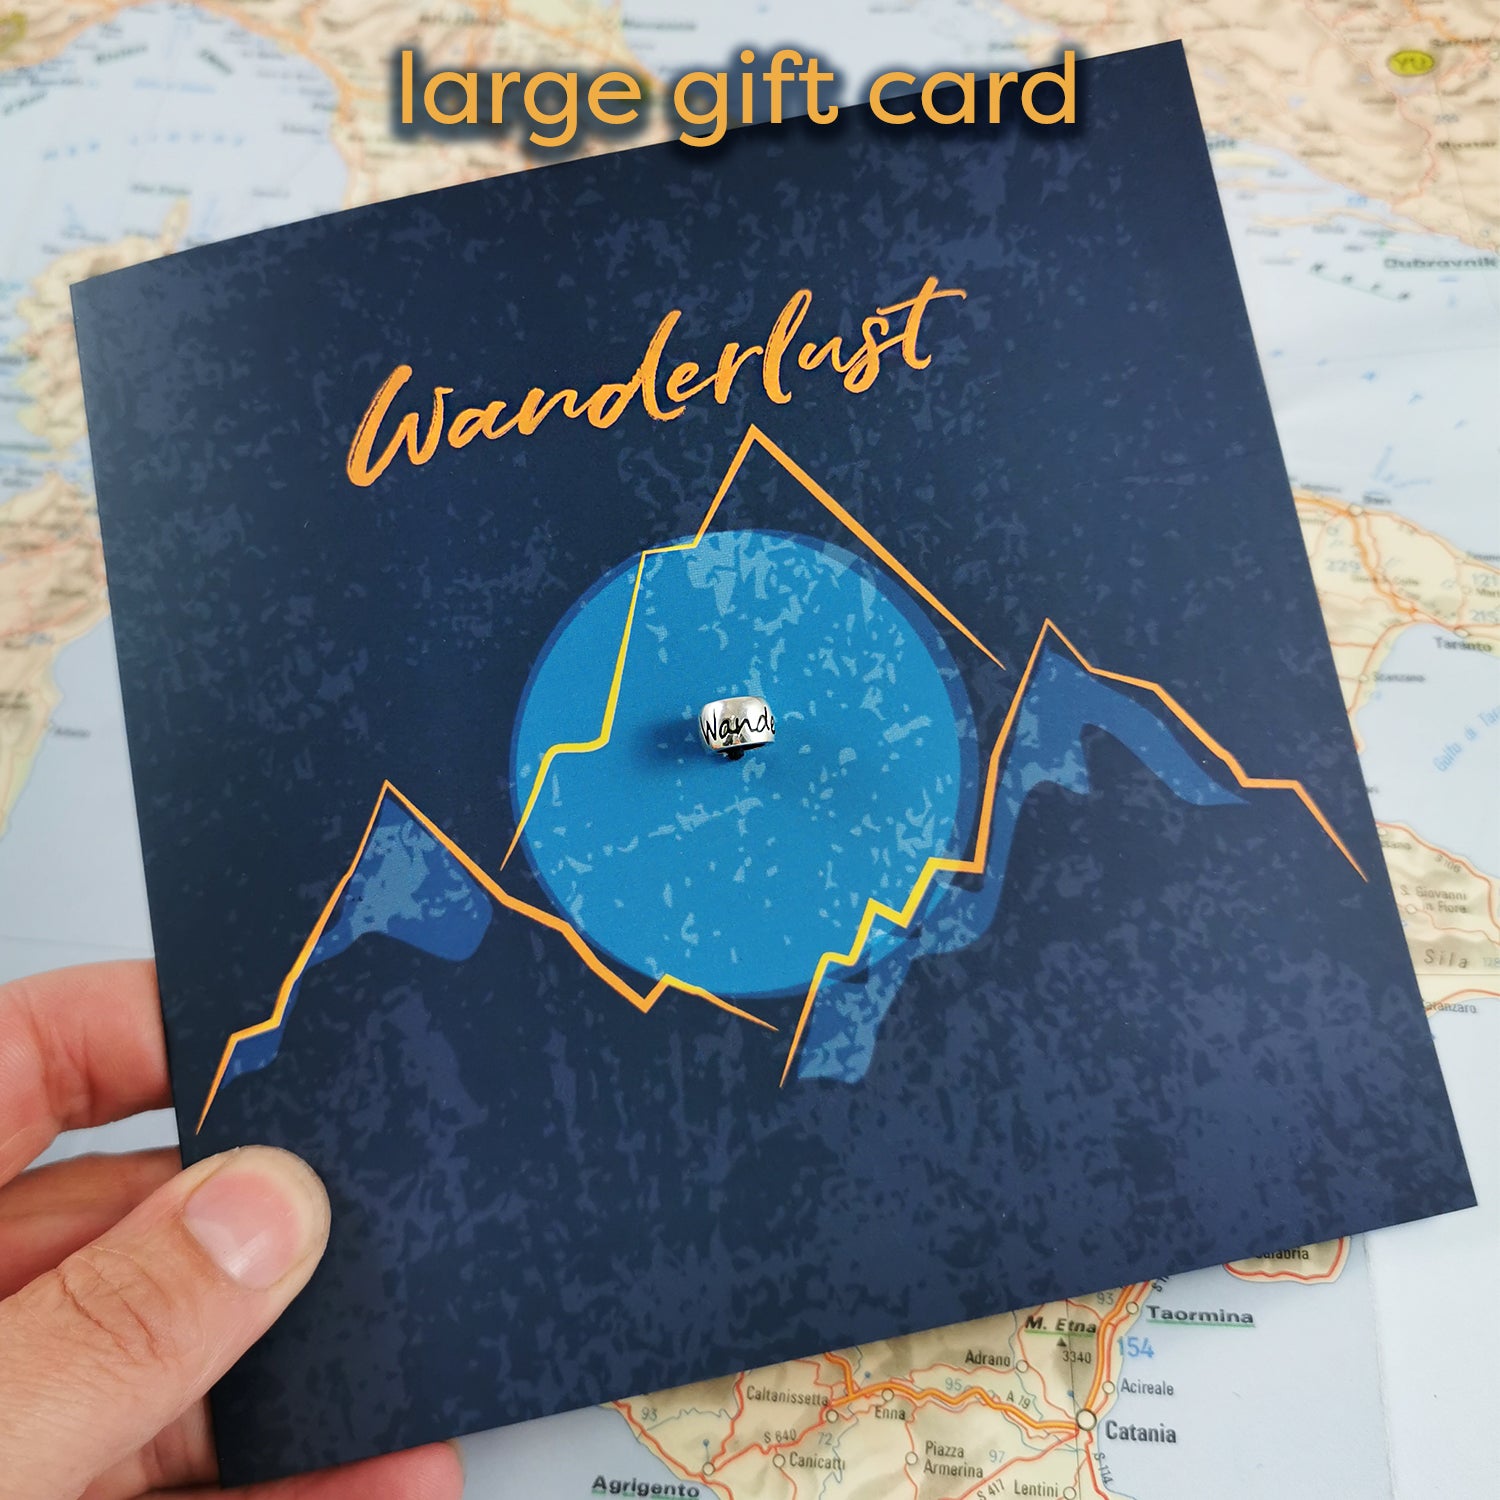 Wanderlust engraved silver bead for necklaces or bead charm bracelets - good luck on your travels gift from Off The Map Jewellery Brighton